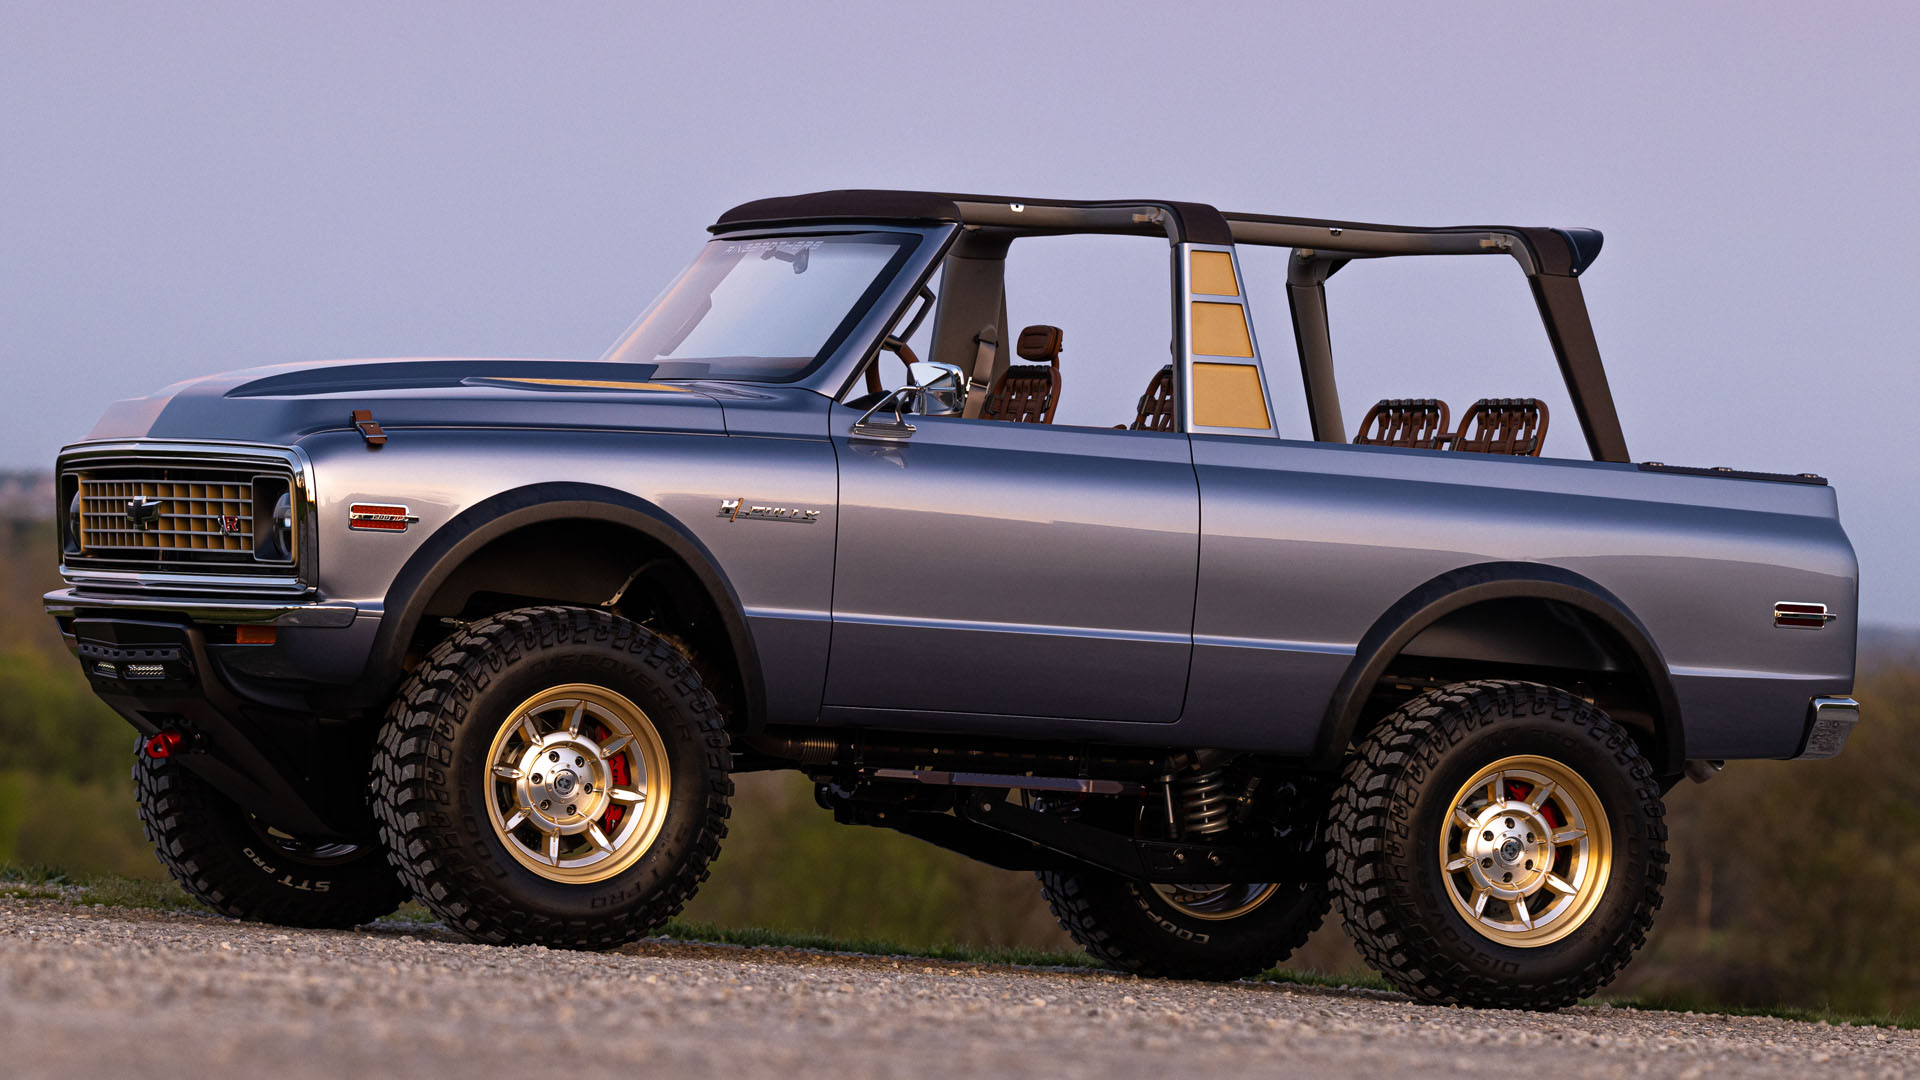 Ringbrothers’ 1972 Chevy Blazer K5 Makes 1,200 HP, and That’s Not Even the Best Part